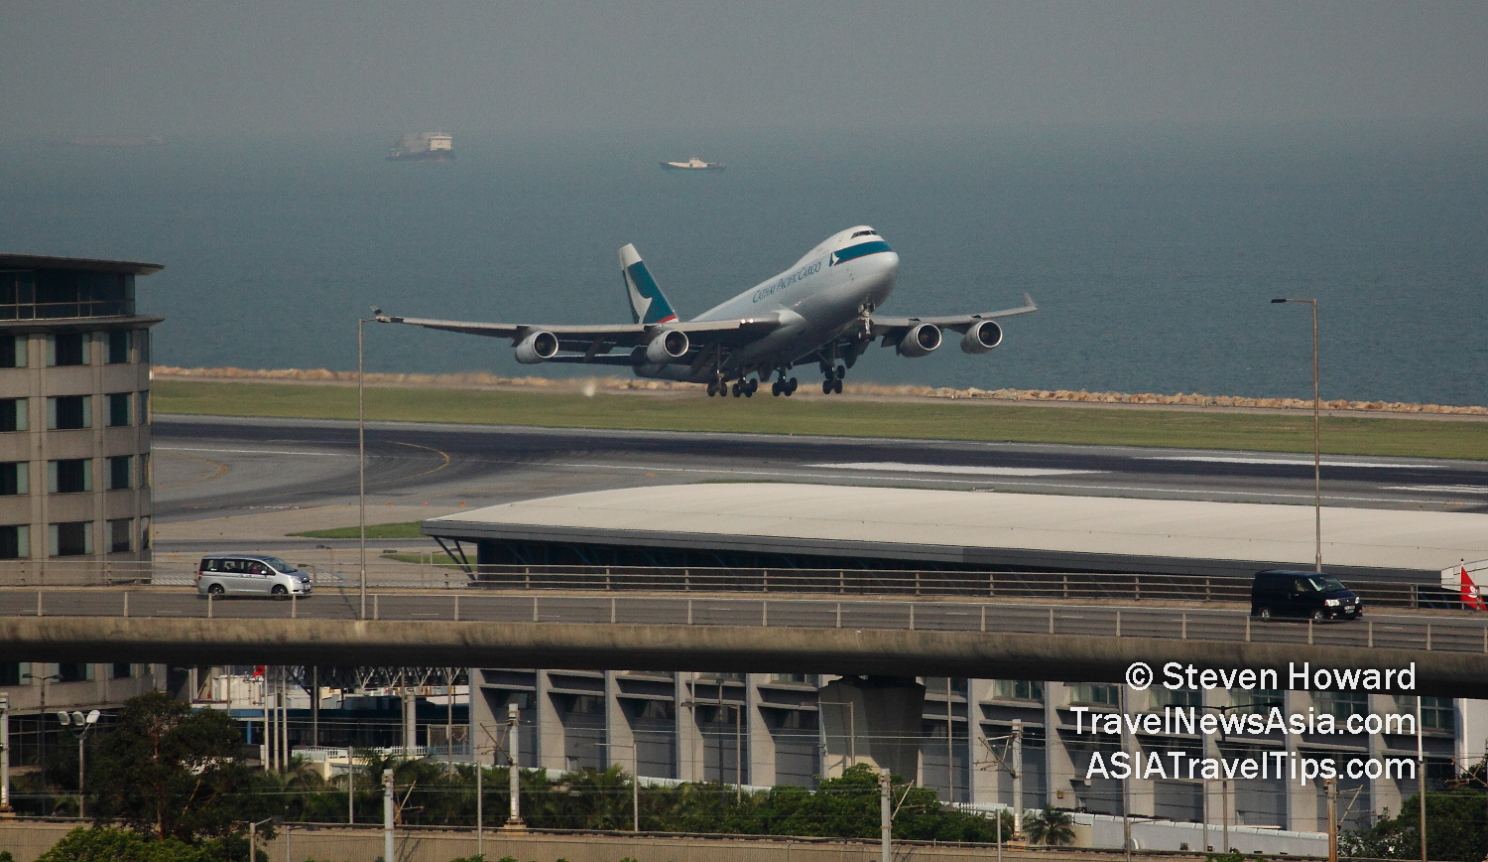 Cathay Pacific B747F taking off from Hong Kong International Airport. Picture by Steven Howard of TravelNewsAsia.com Click to enlarge.